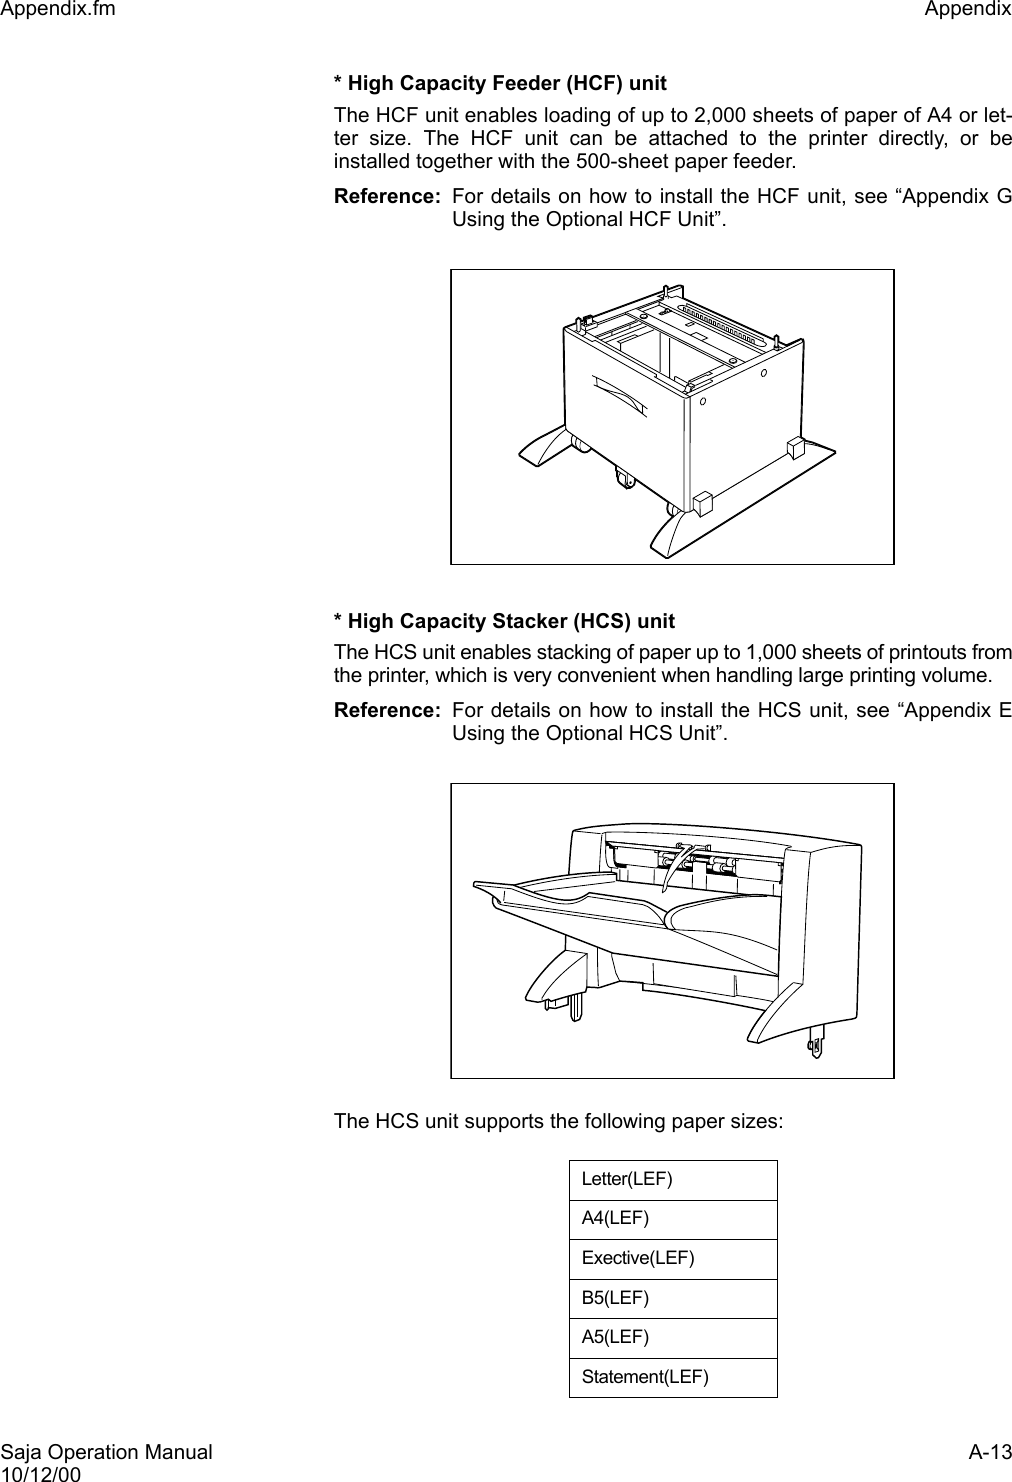 Saja Operation Manual A-1310/12/00Appendix.fm Appendix * High Capacity Feeder (HCF) unitThe HCF unit enables loading of up to 2,000 sheets of paper of A4 or let-ter size. The HCF unit can be attached to the printer directly, or beinstalled together with the 500-sheet paper feeder. Reference: For details on how to install the HCF unit, see “Appendix GUsing the Optional HCF Unit”.* High Capacity Stacker (HCS) unitThe HCS unit enables stacking of paper up to 1,000 sheets of printouts fromthe printer, which is very convenient when handling large printing volume.Reference: For details on how to install the HCS unit, see “Appendix EUsing the Optional HCS Unit”.The HCS unit supports the following paper sizes:Letter(LEF)A4(LEF)Exective(LEF)B5(LEF)A5(LEF)Statement(LEF)